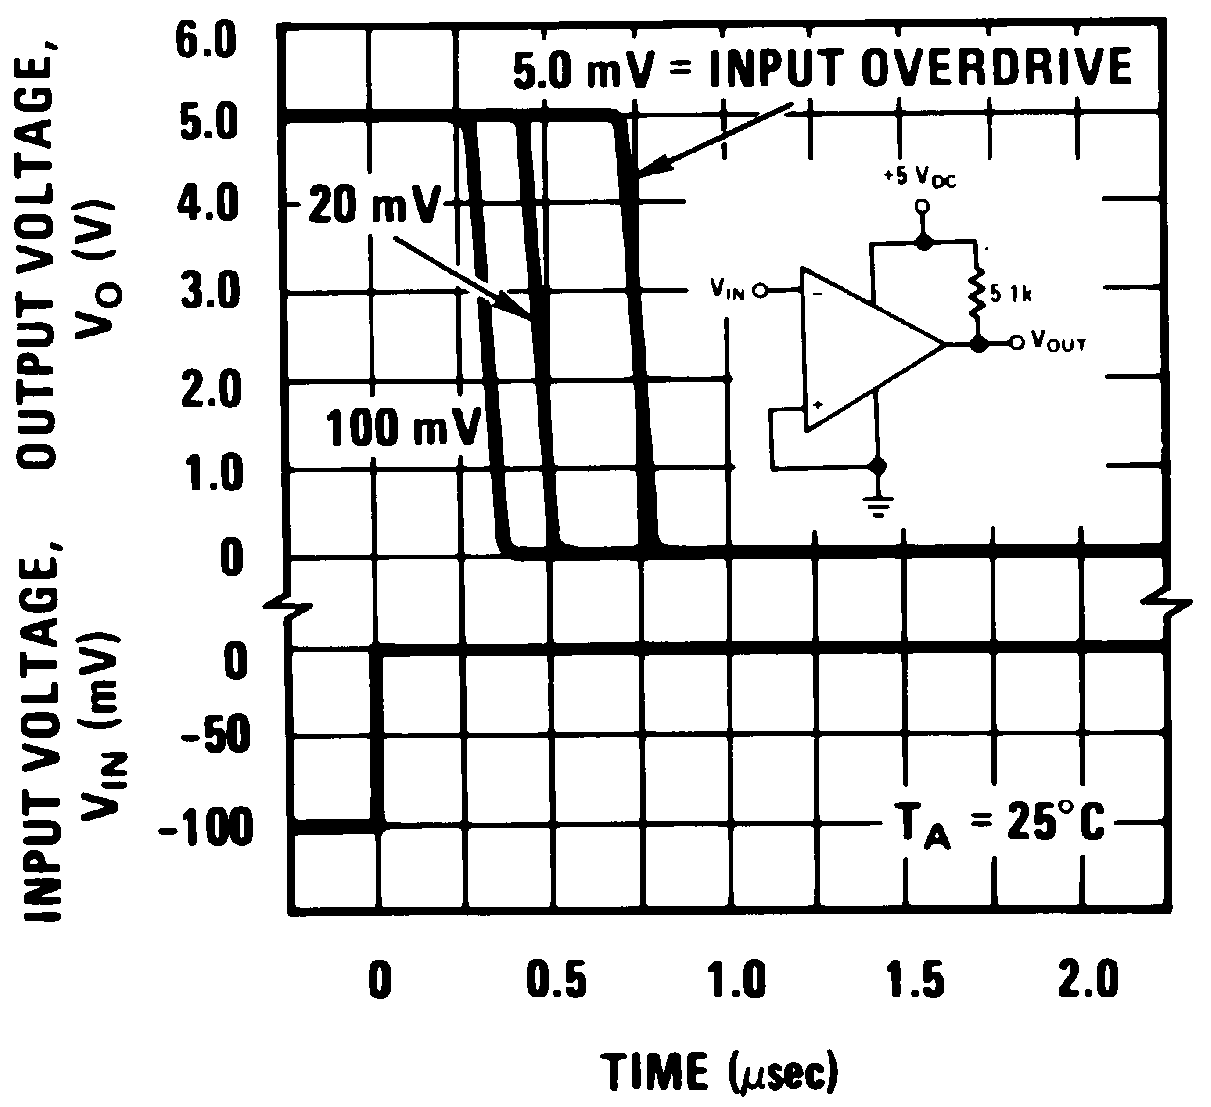 LM339-MIL lm339-mil-response-time-for-various-input-overdrives-negative-transition.png